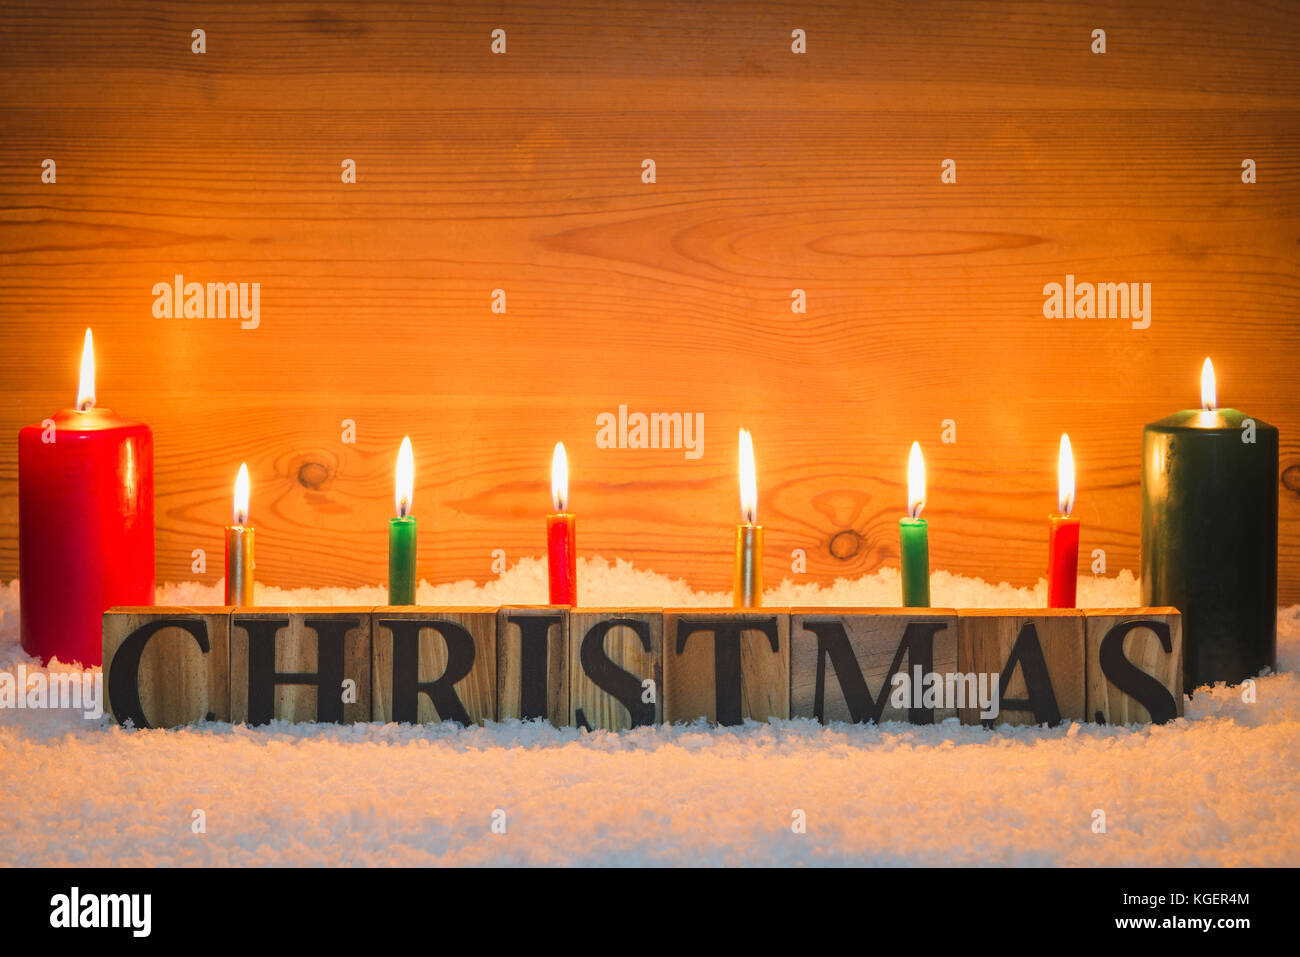 The word Christmas made from wooden letters in artificial snow with candles burning and a wooden background. Stock Photo